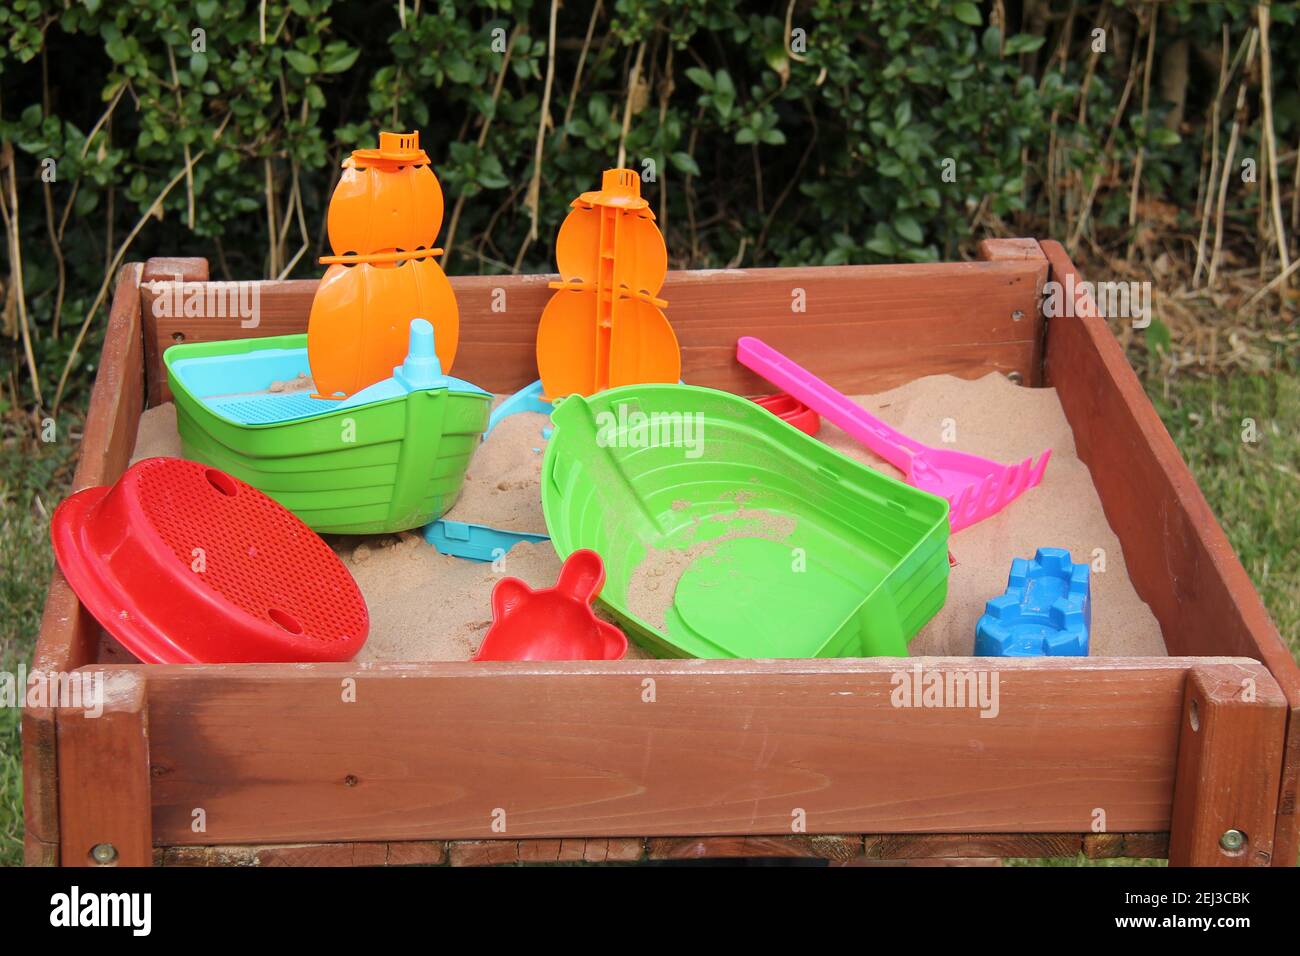 A Collection of Plastic Toys in a Garden Sandpit. Stock Photo